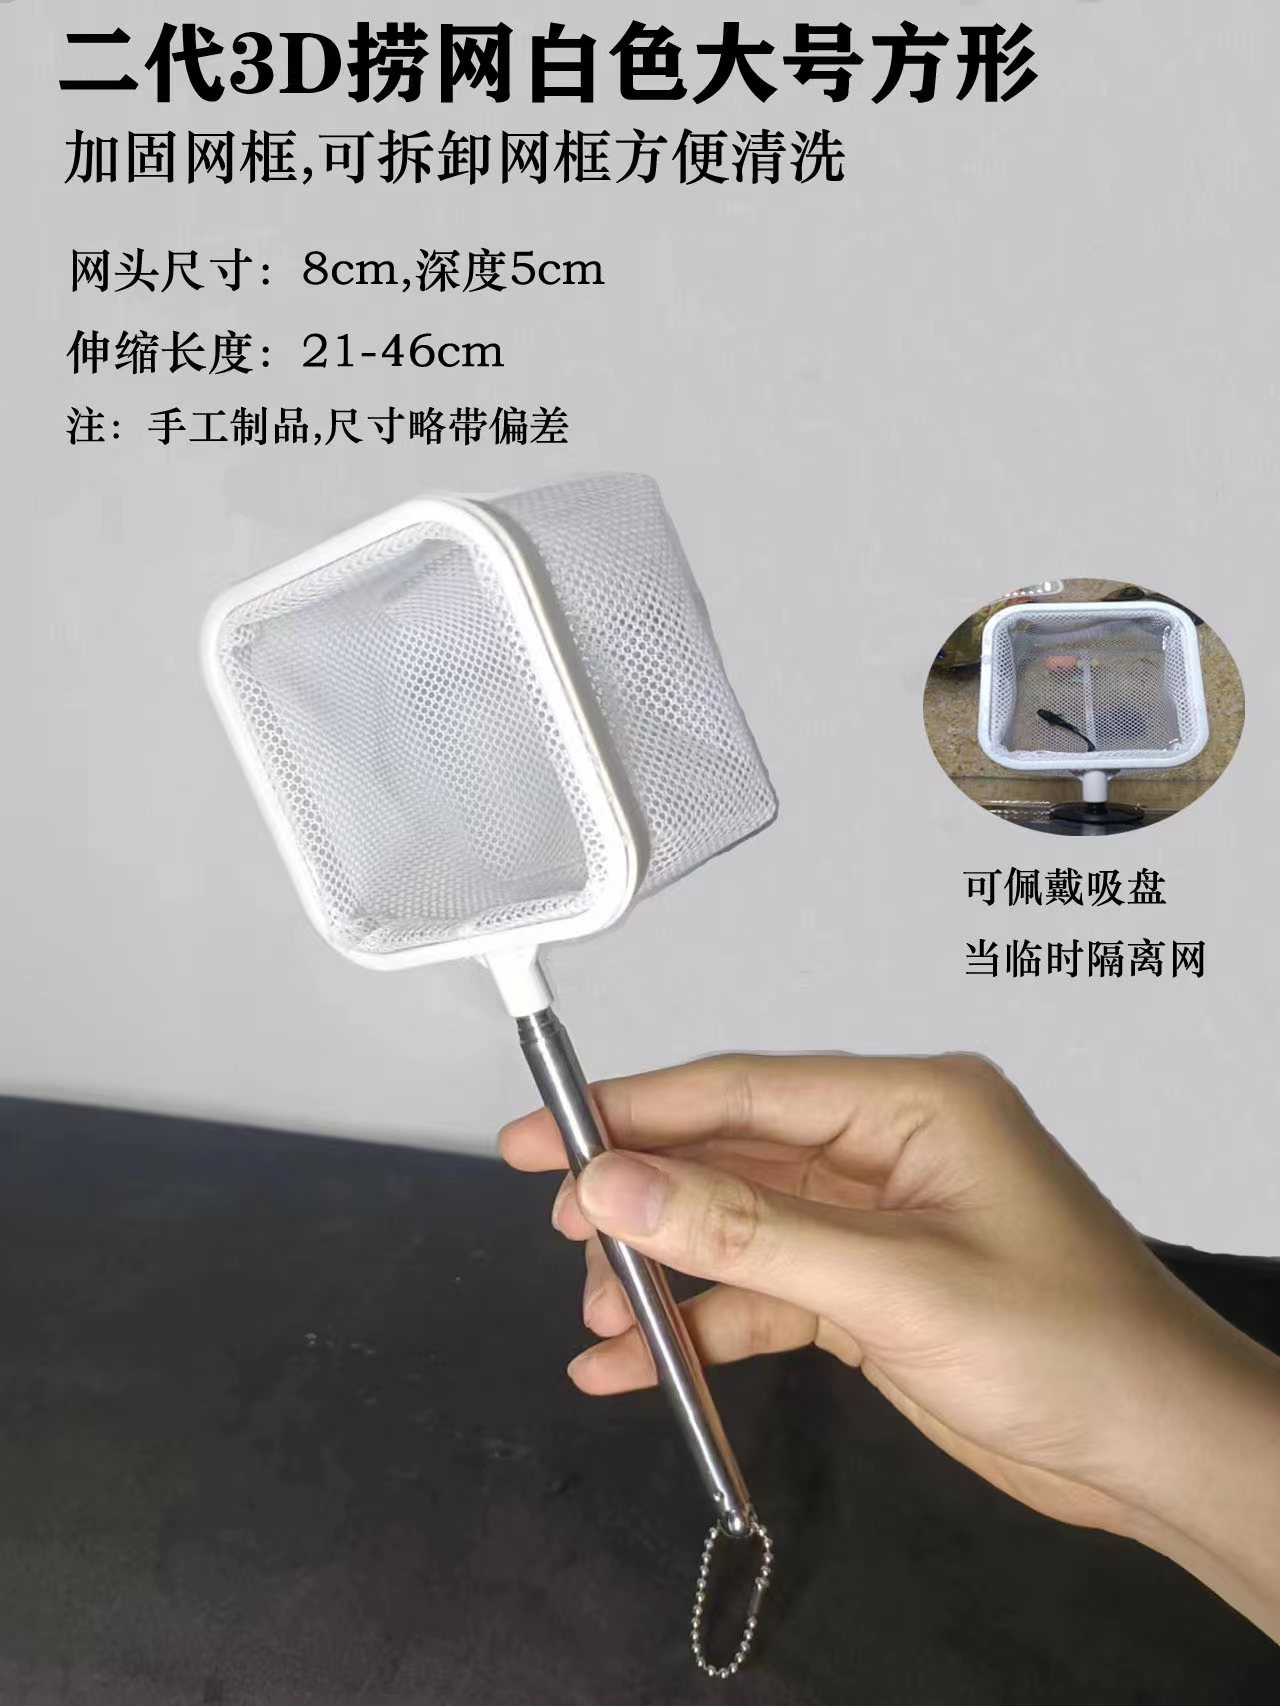 GGMM New Second Generation Stainless Steel Retractable Fish Net